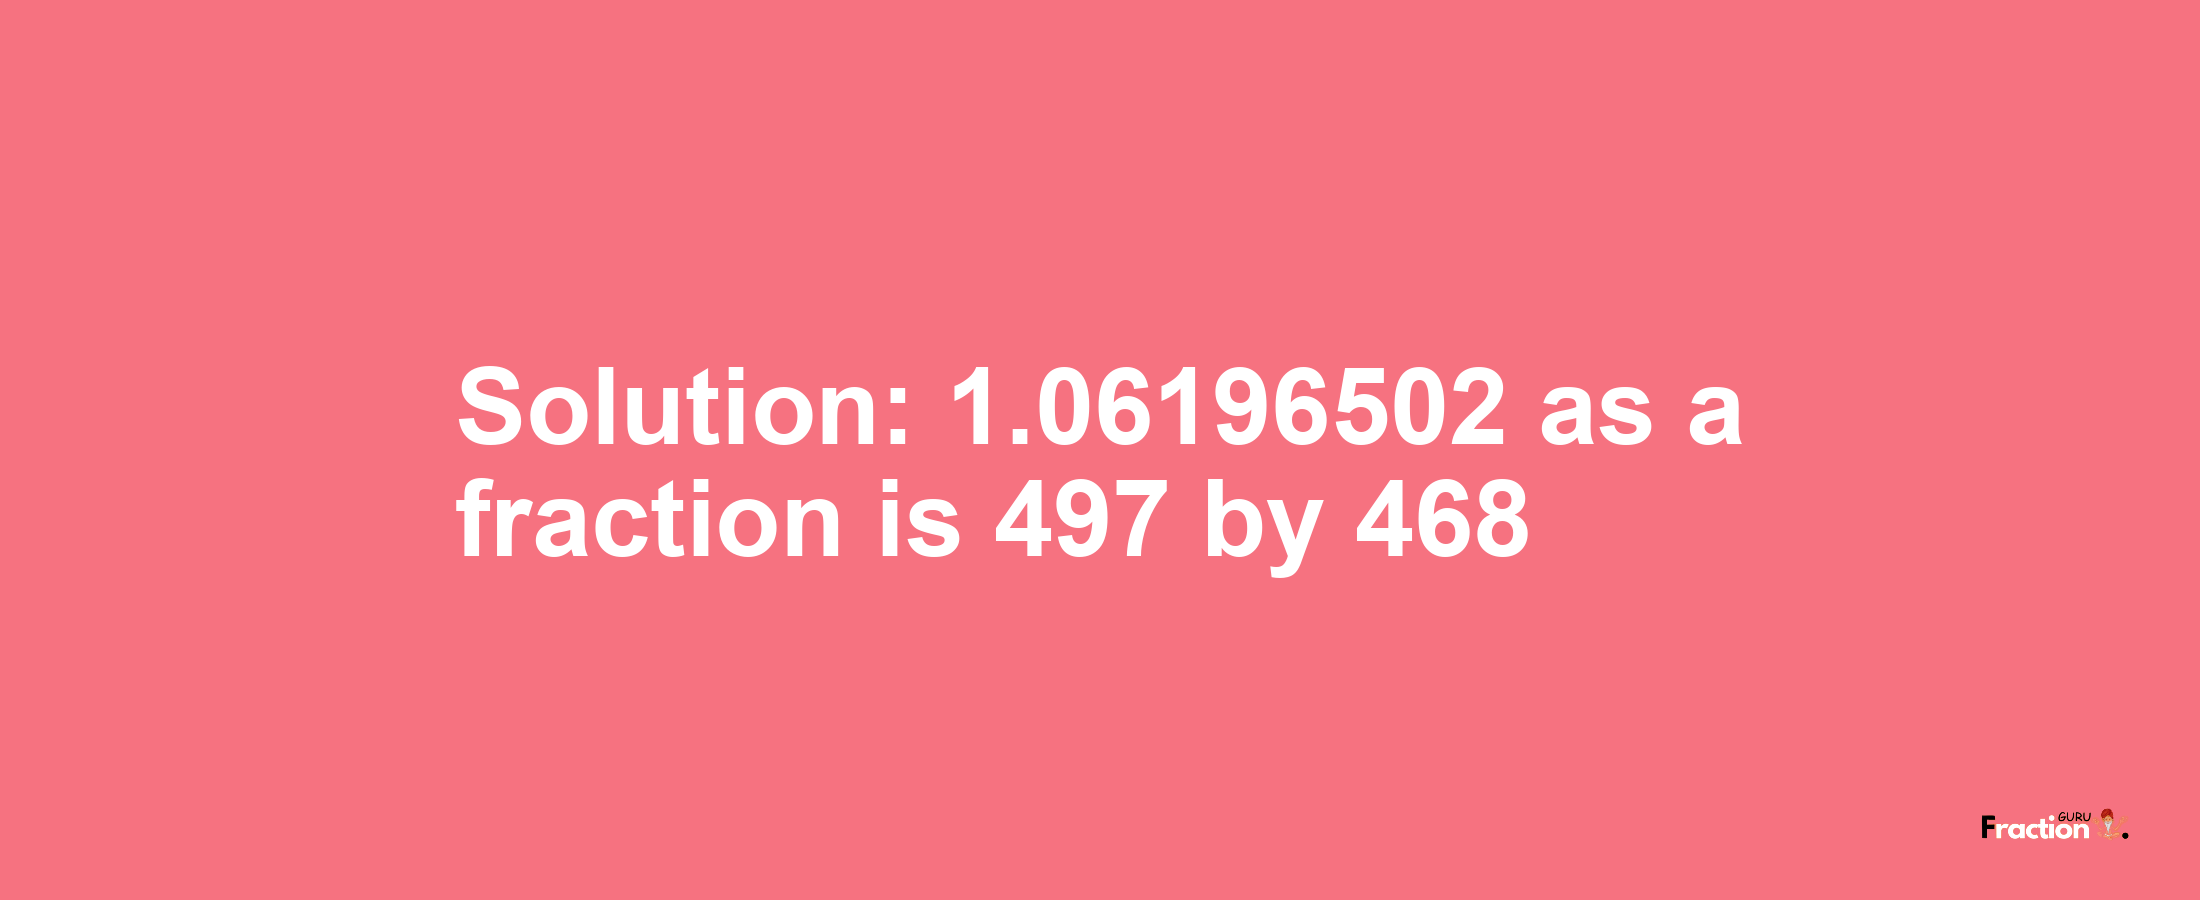 Solution:1.06196502 as a fraction is 497/468